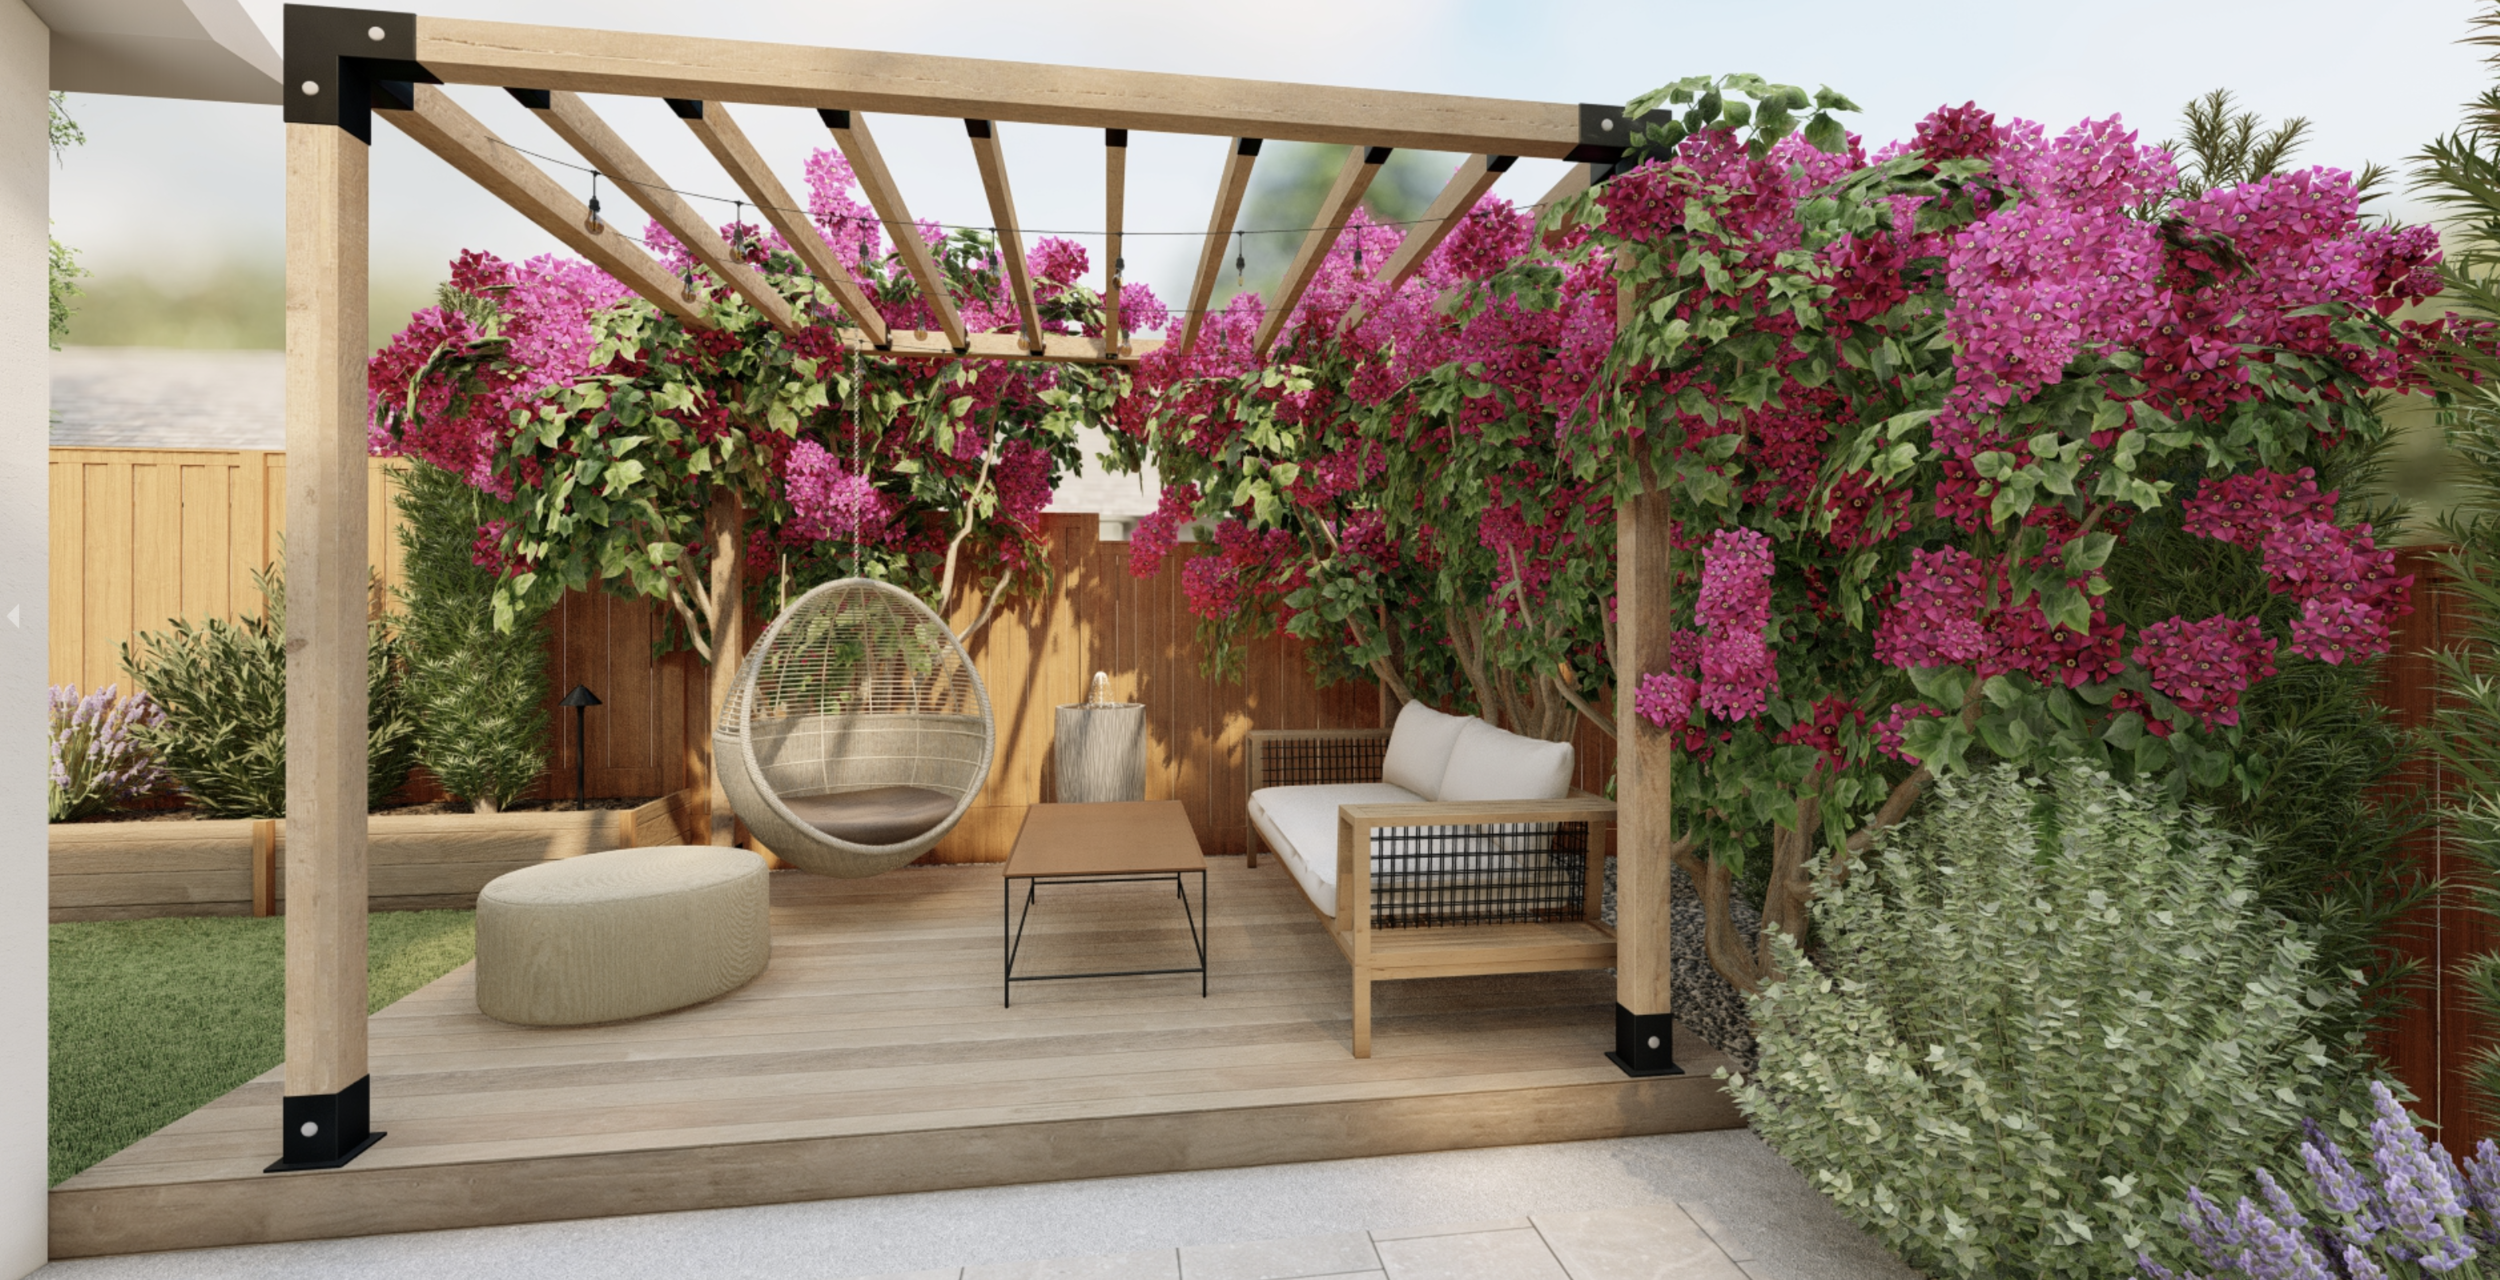 California back yard enjoys additional privacy thanks to a bourgenvilla covered pergola